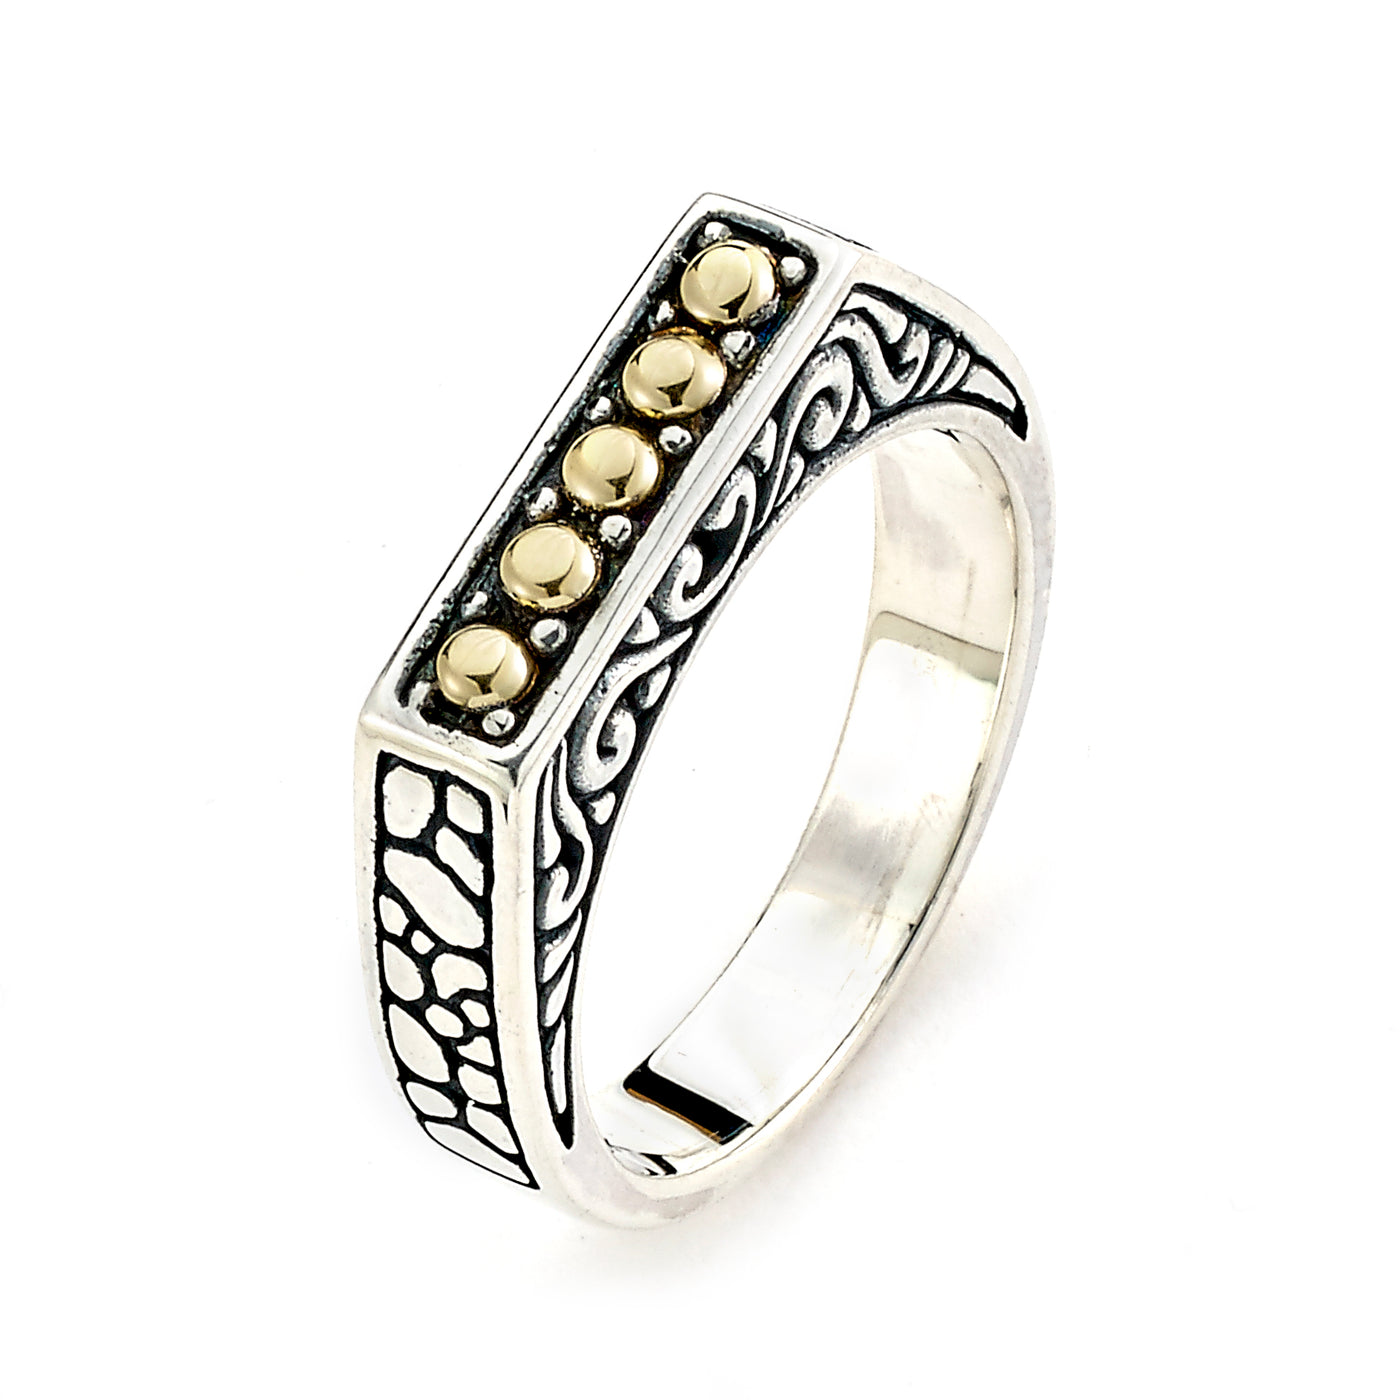 Sterling Silver and 18K Balinese Design Bar Ring